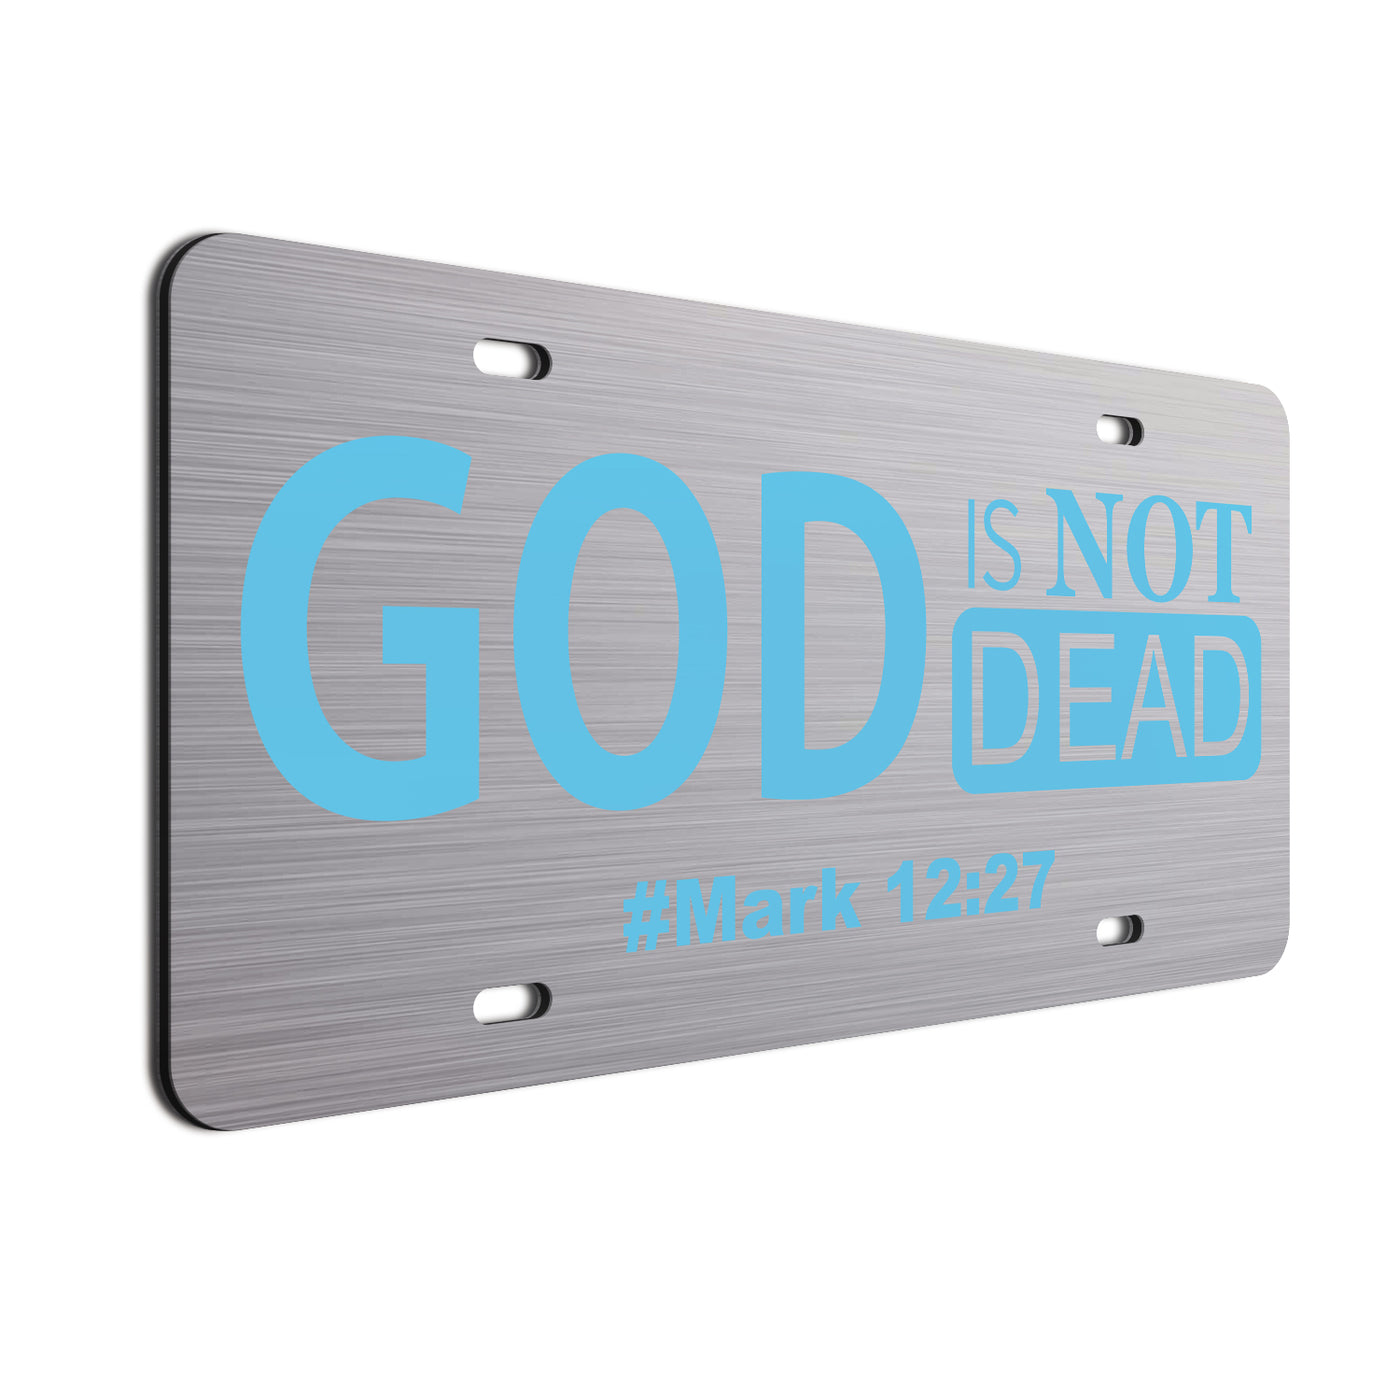  God Is Not Dead Car License Plate Baby Blue